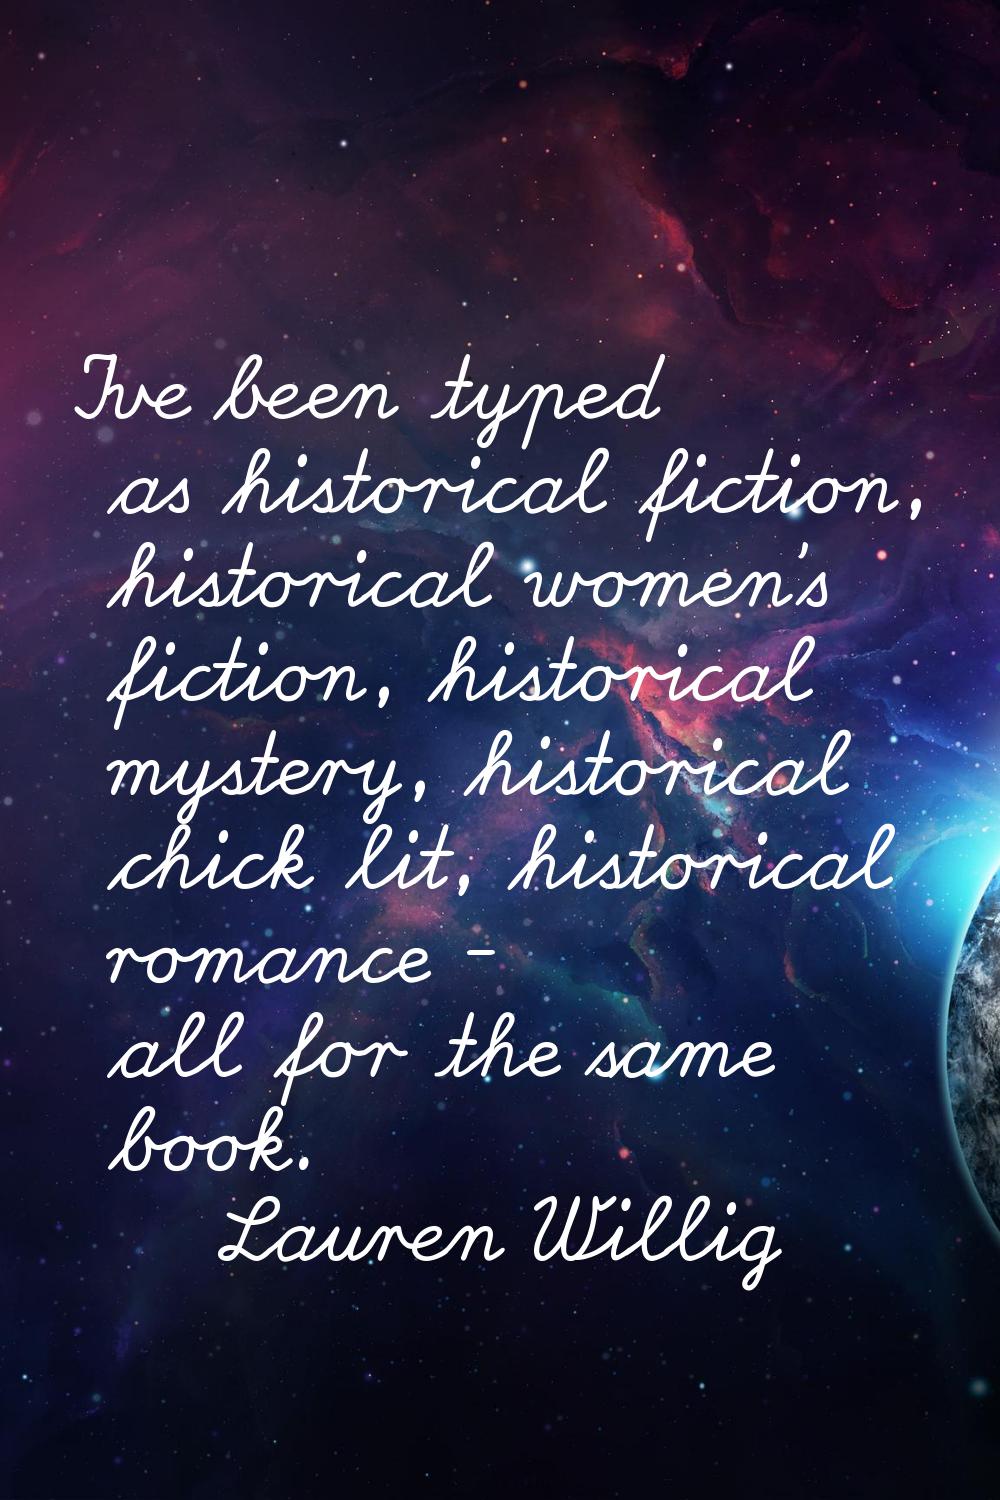 I've been typed as historical fiction, historical women's fiction, historical mystery, historical c